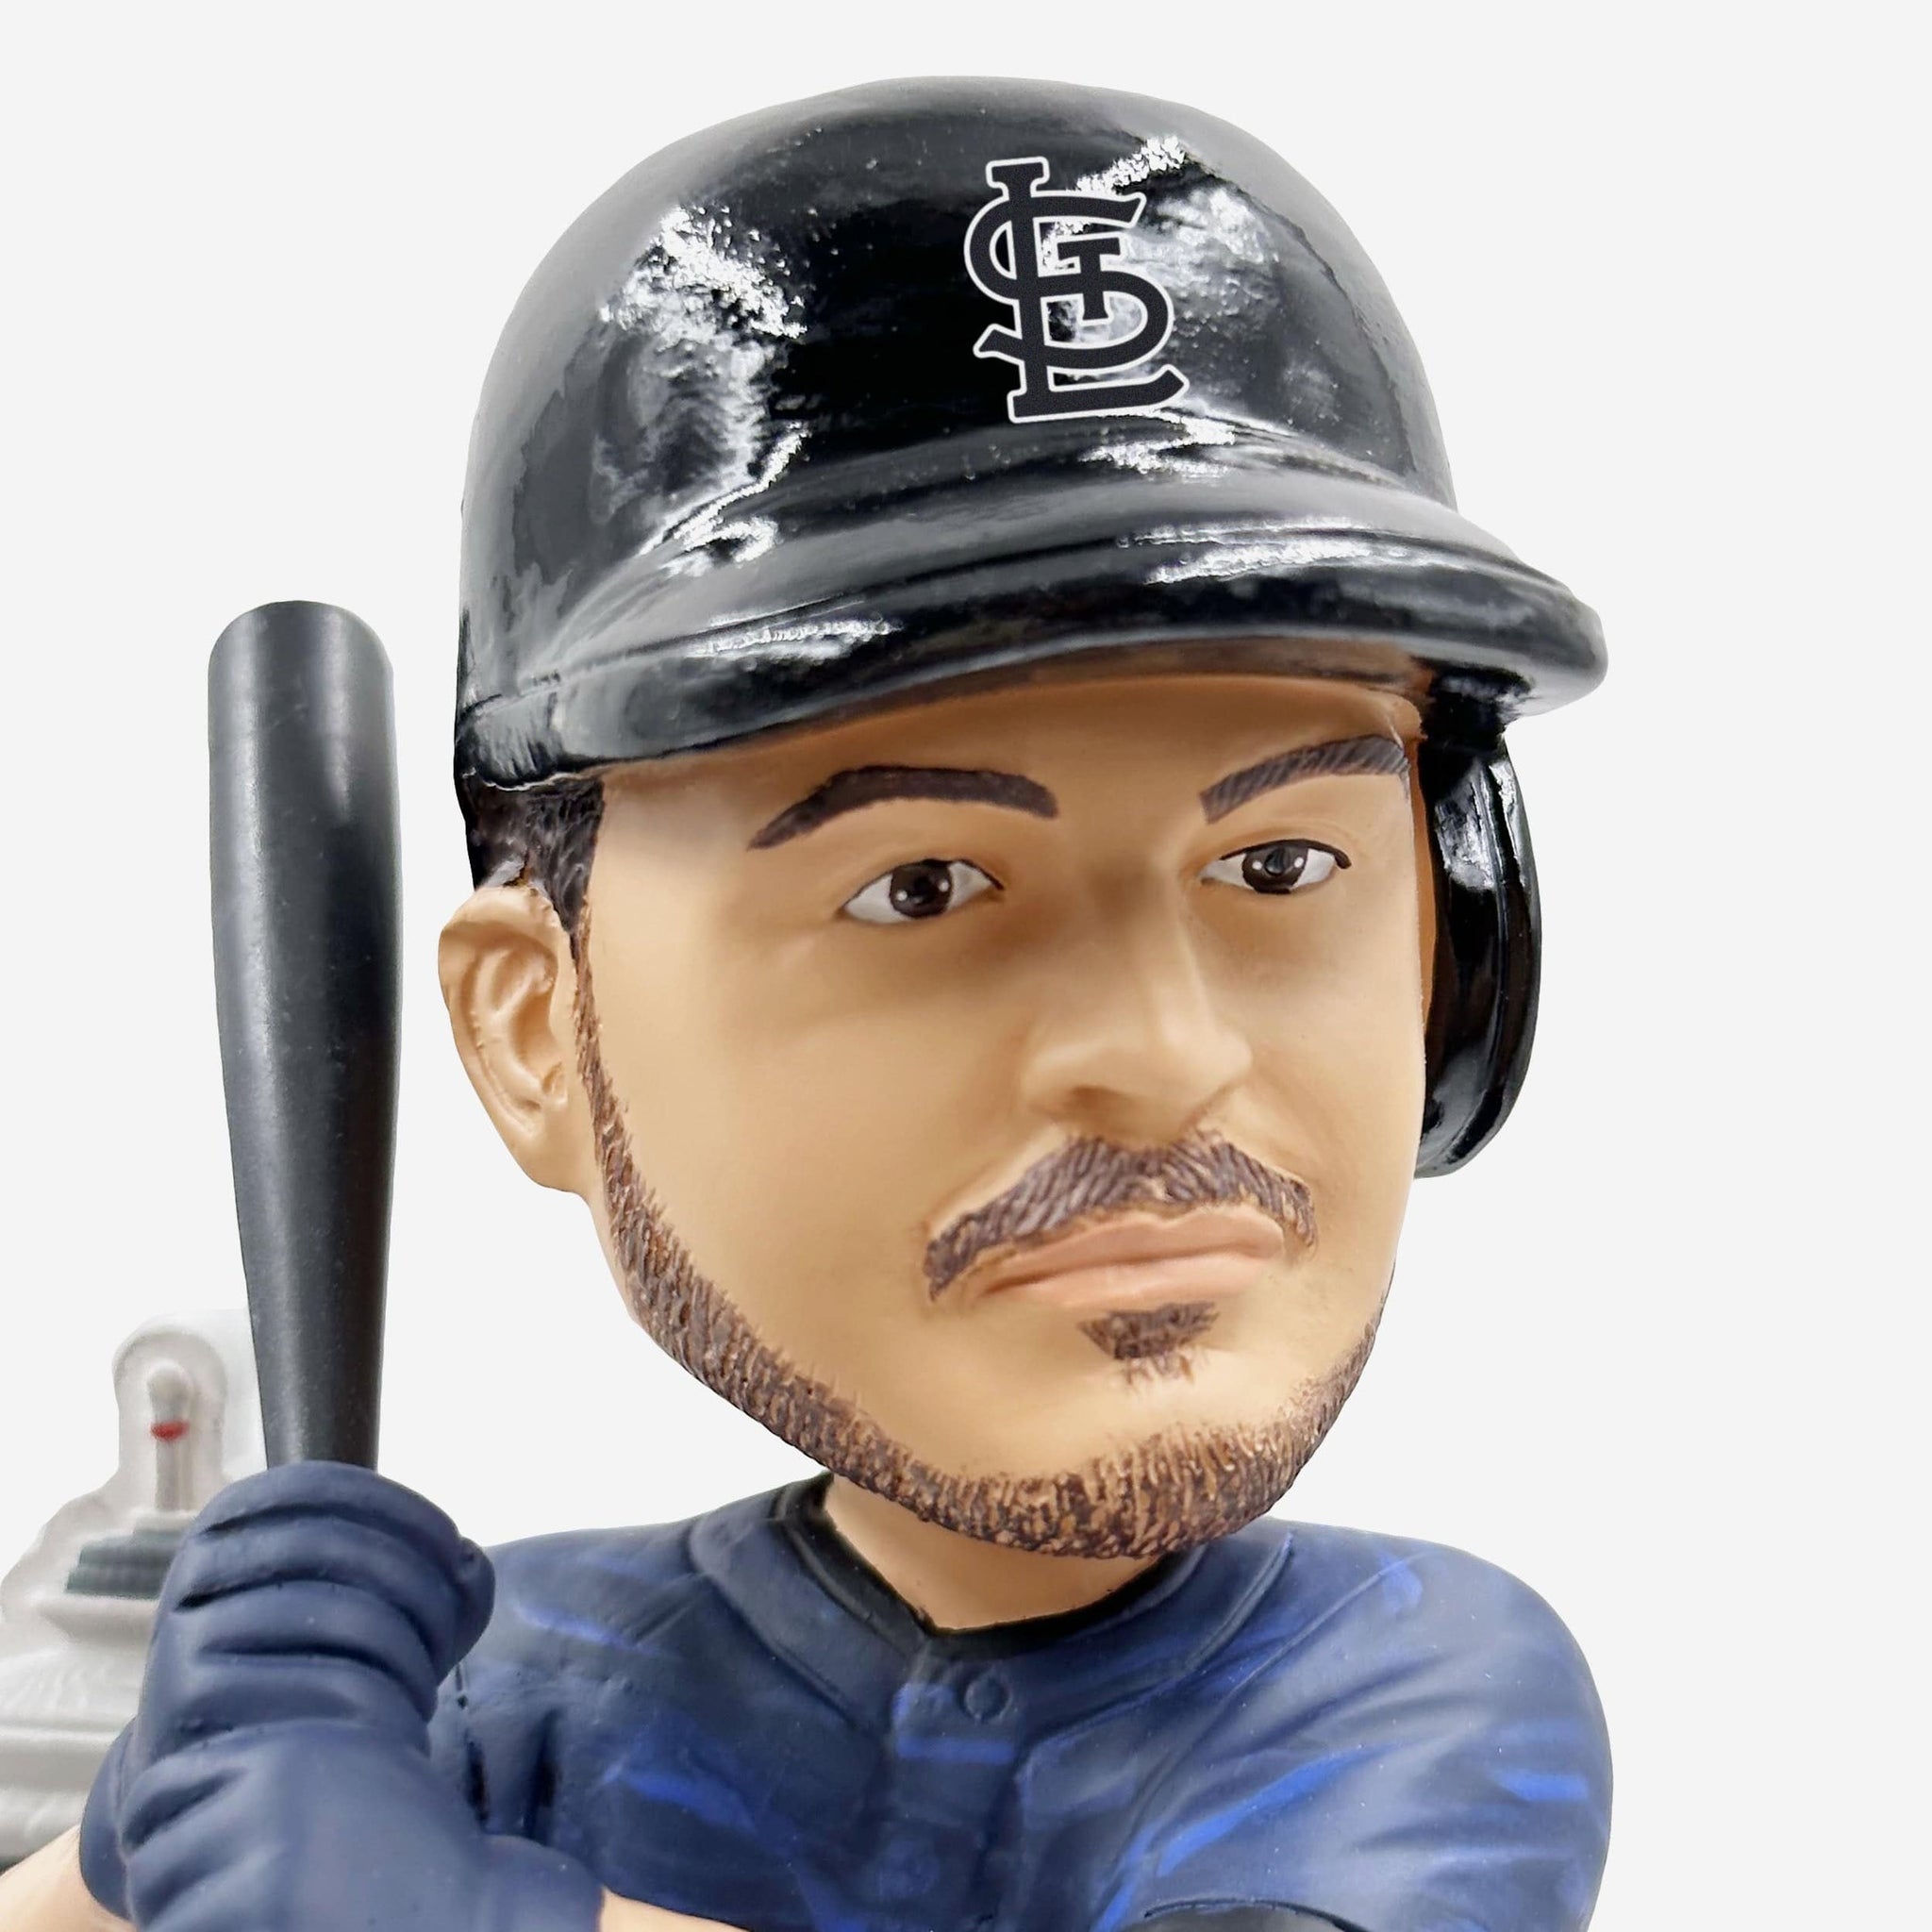 Nolan Arenado St Louis Cardinals Bank Bobblehead Officially Licensed by MLB